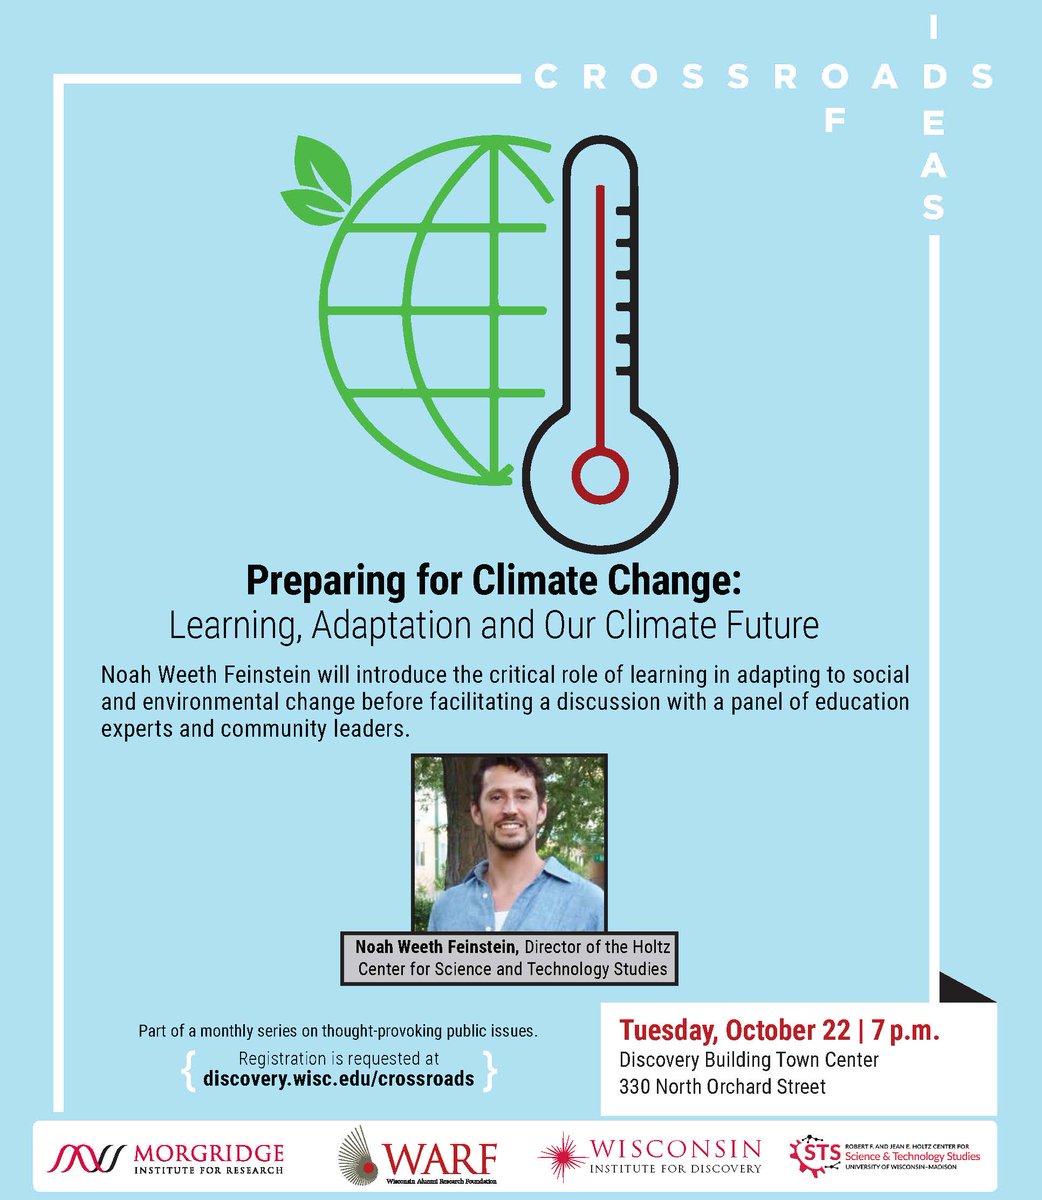 Join our director @NoahWeethFeinst & a panel of education experts & community leaders Oct 22. They'll discuss the critical role of learning & adapting to social & environmental changes #crossroadsofideas
sts.wisc.edu/event/preparin…